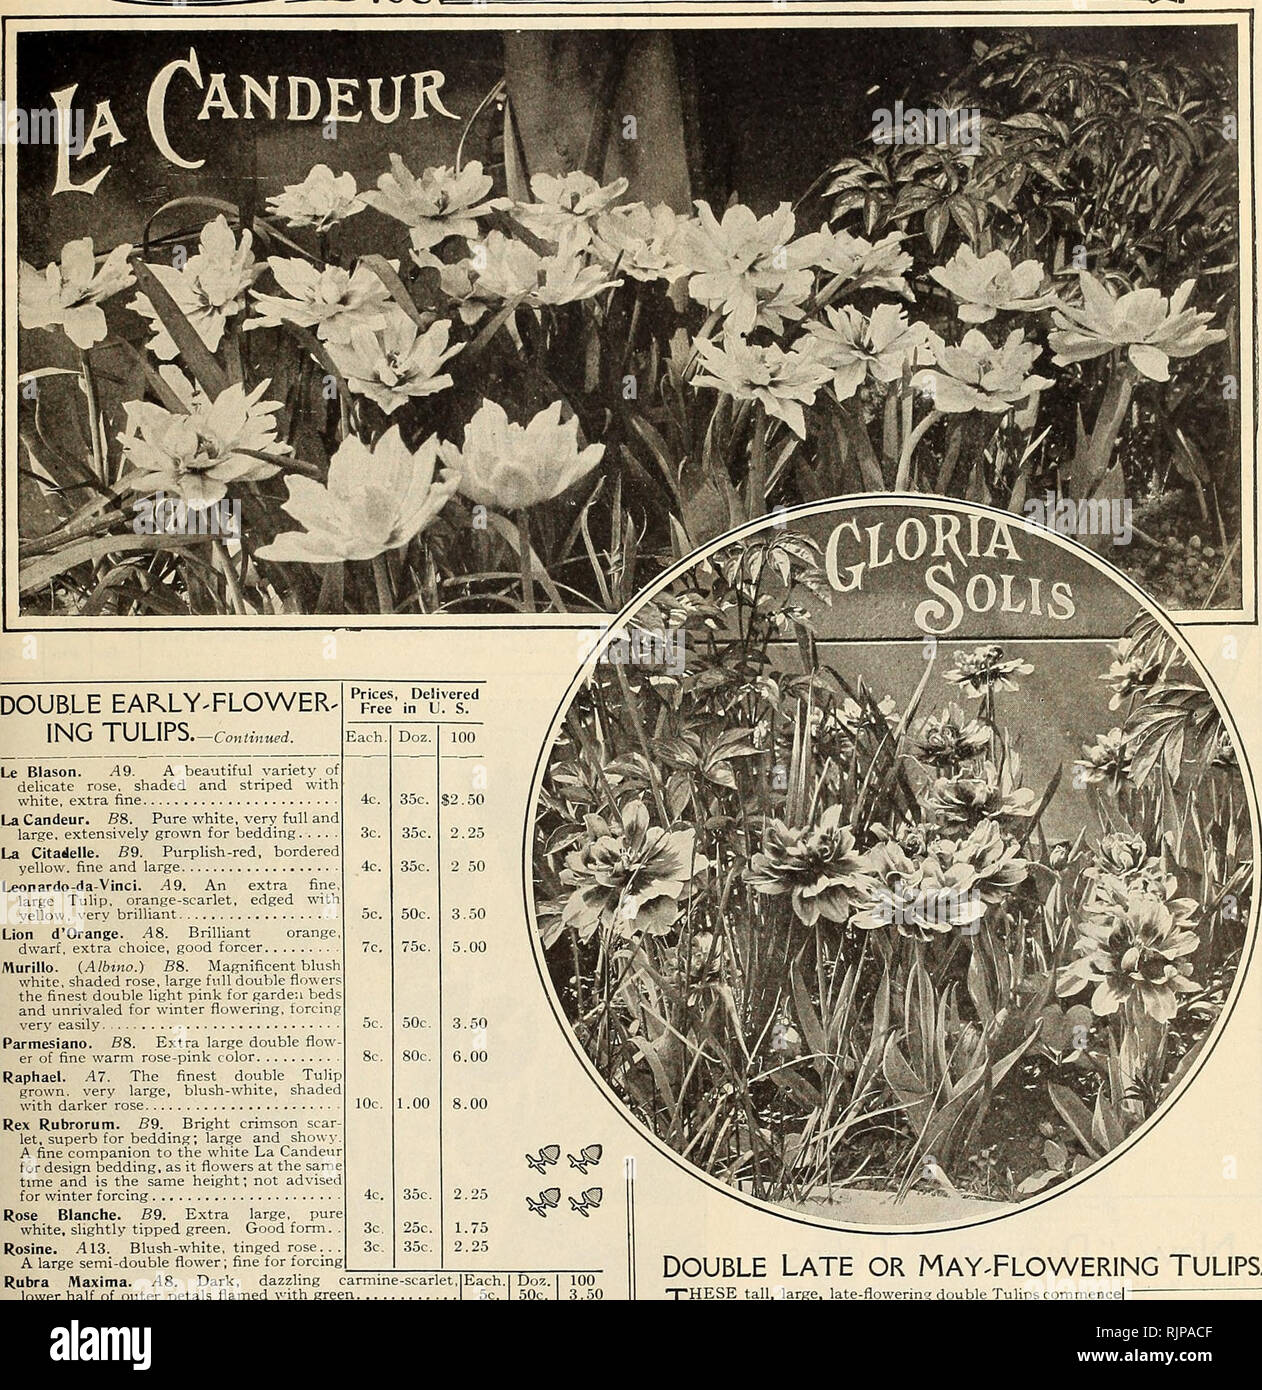 . Autumn catalogue : 1904. Gardening Equipment and supplies Catalogs; Seeds Catalogs; Bulbs (Plants) Catalogs; Flowers Seeds Catalogs; Vegetables Seeds Catalogs. •PETER HENDERSON fie CO., NEW YORK- Q 15. Le Blason. ^9. A beautiful variety of delicate rose, shaded and striped with white, extra fine La Candeur. B8. Pure white, very full and large, extensively grown for bedding La Citadelle. S9. Purplish-red, bordered yellow, fine and large Leonardo-da-Vinci. .49. An extra fine, large Tulip, orange-scarlet, edged with yellow. very brilliant Lion d'Orange. .48. Brilliant orange dwarf, extra choice Stock Photo